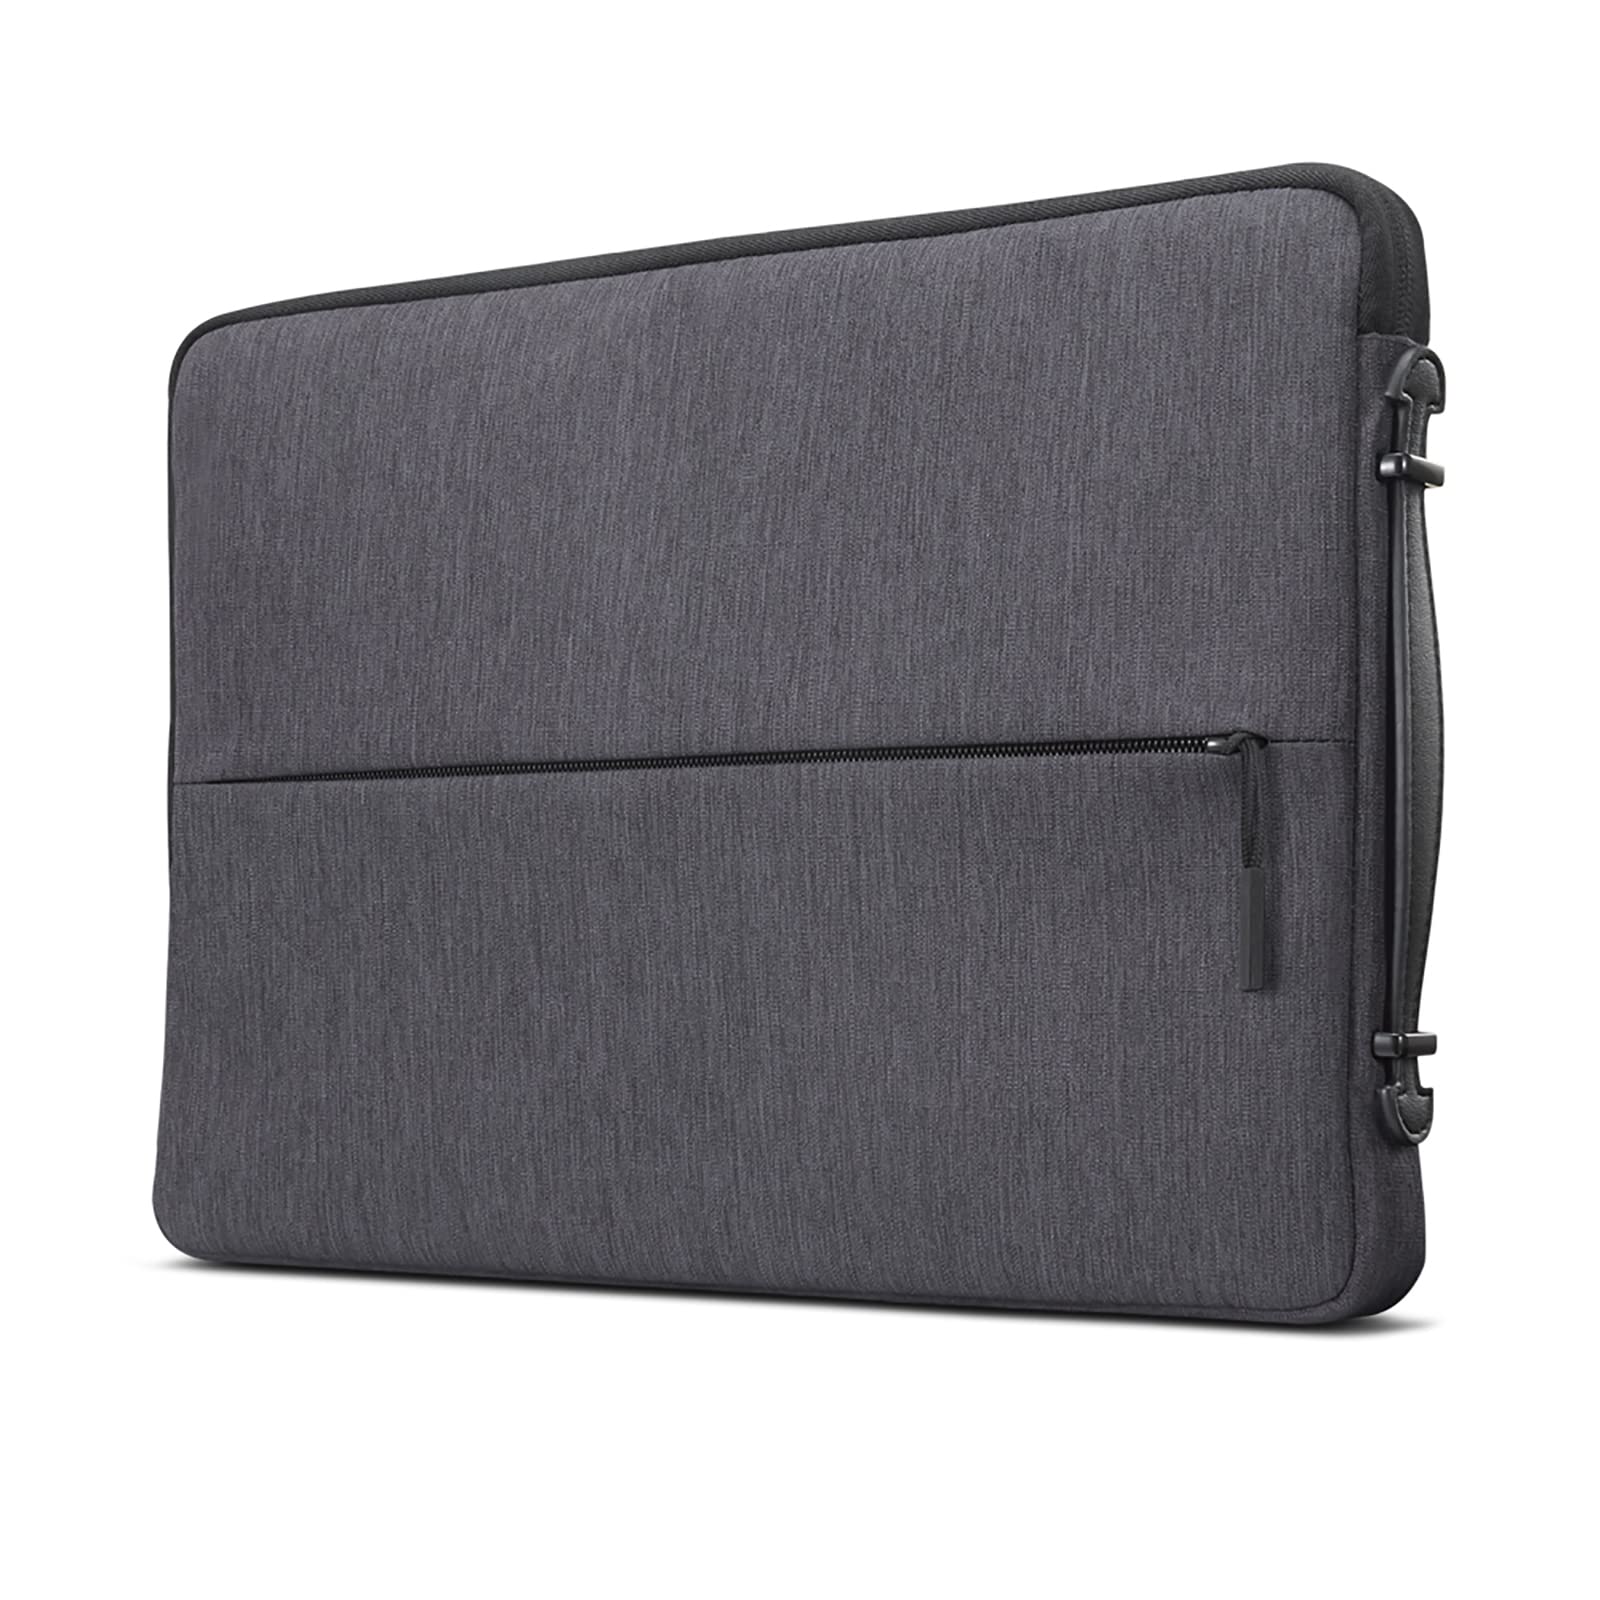 Lenovo Urban Sleeve for 15.6-inch Laptop/Notebook/Tablet - Water Resistant - Padded Compartments - Zippered Accessory Storage - Reinforced Rubber Corners - Extendable Handle - Charcoal Grey